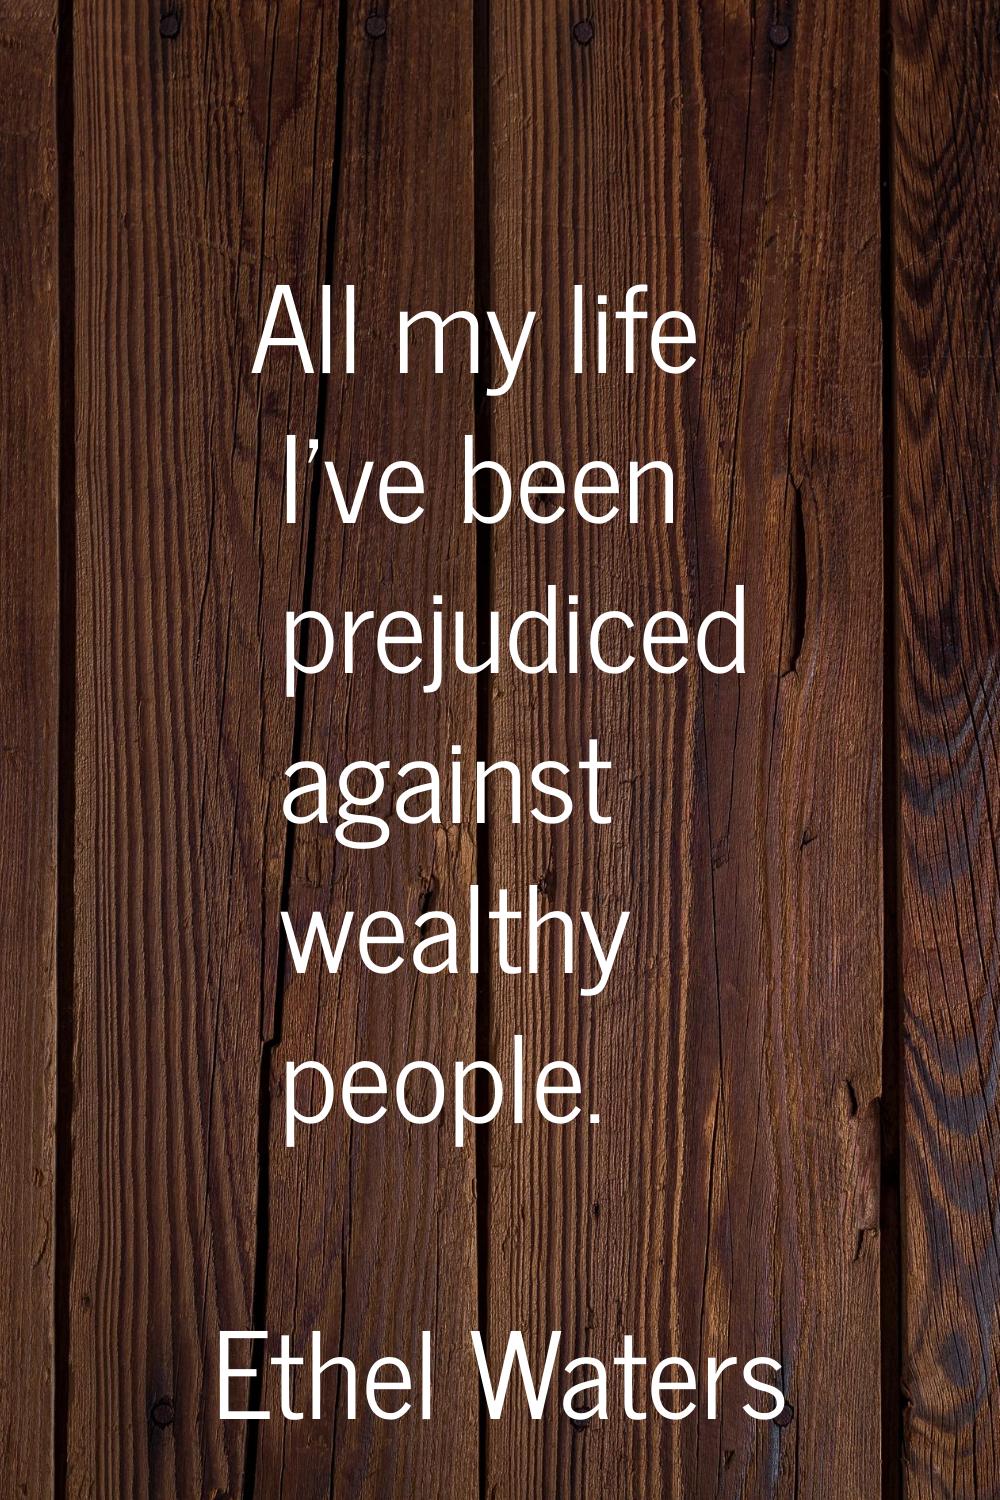 All my life I've been prejudiced against wealthy people.